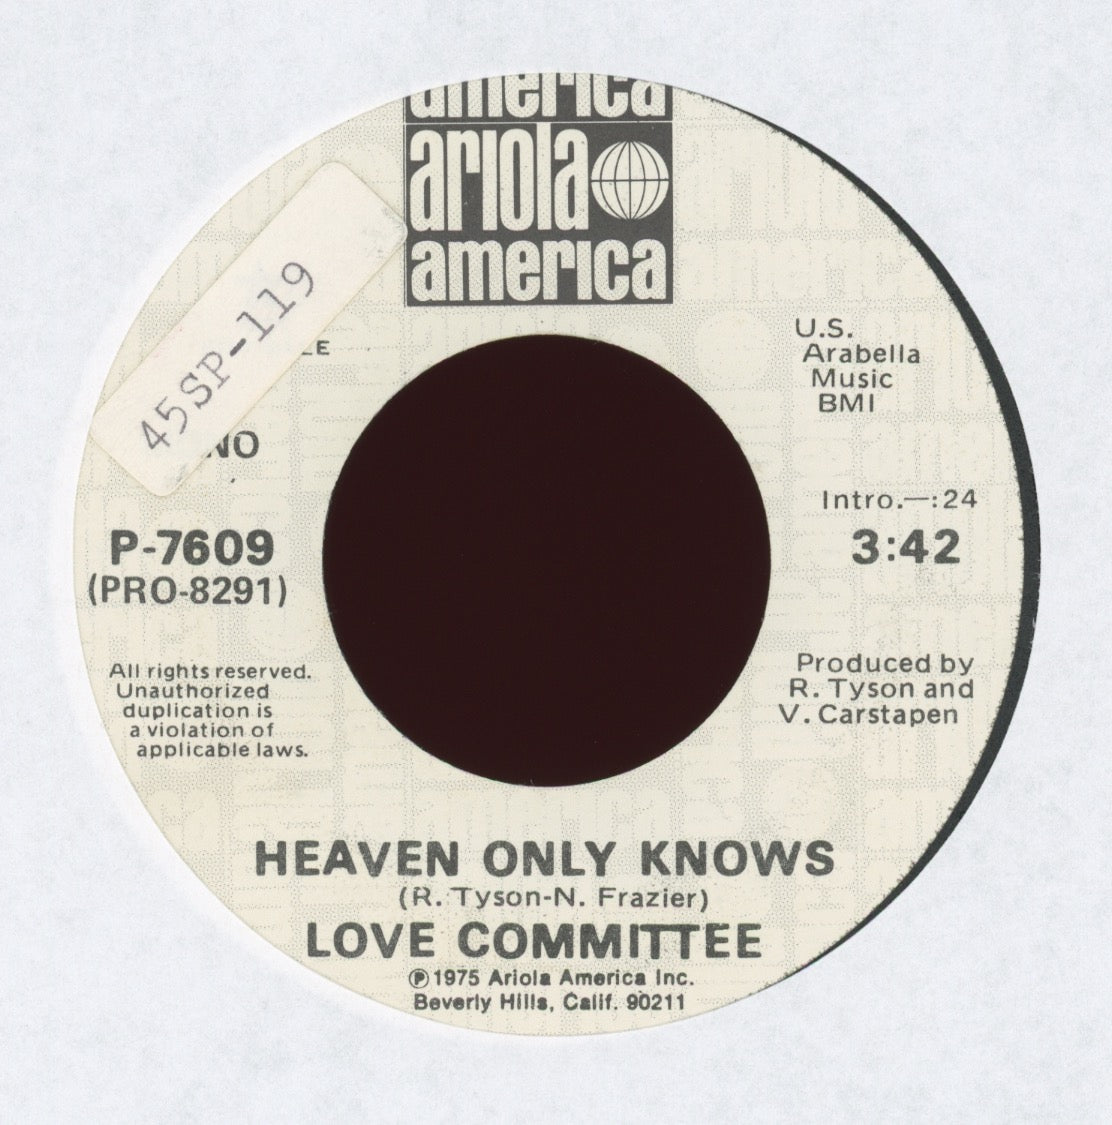 Love Committee - Heaven Only Knows on Ariola America Promo